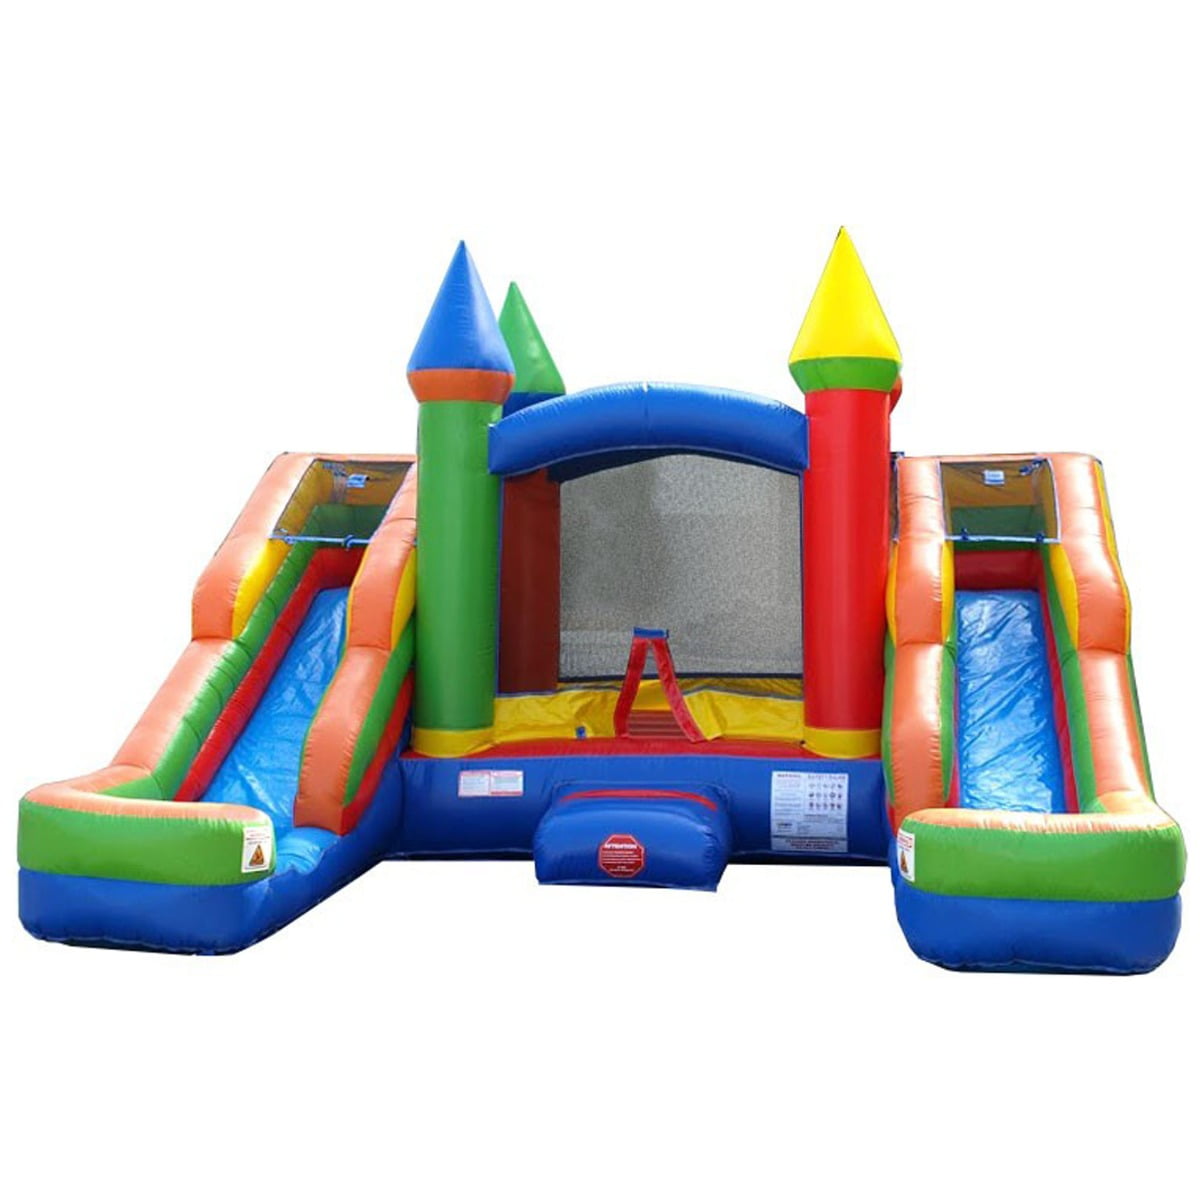 Inflatable Toy Football Field Indoor Kindergarten Fitness Exercise Children's Outdoor Castle Children's Gifts with Blower Color : Green, Size : 800335130cm 